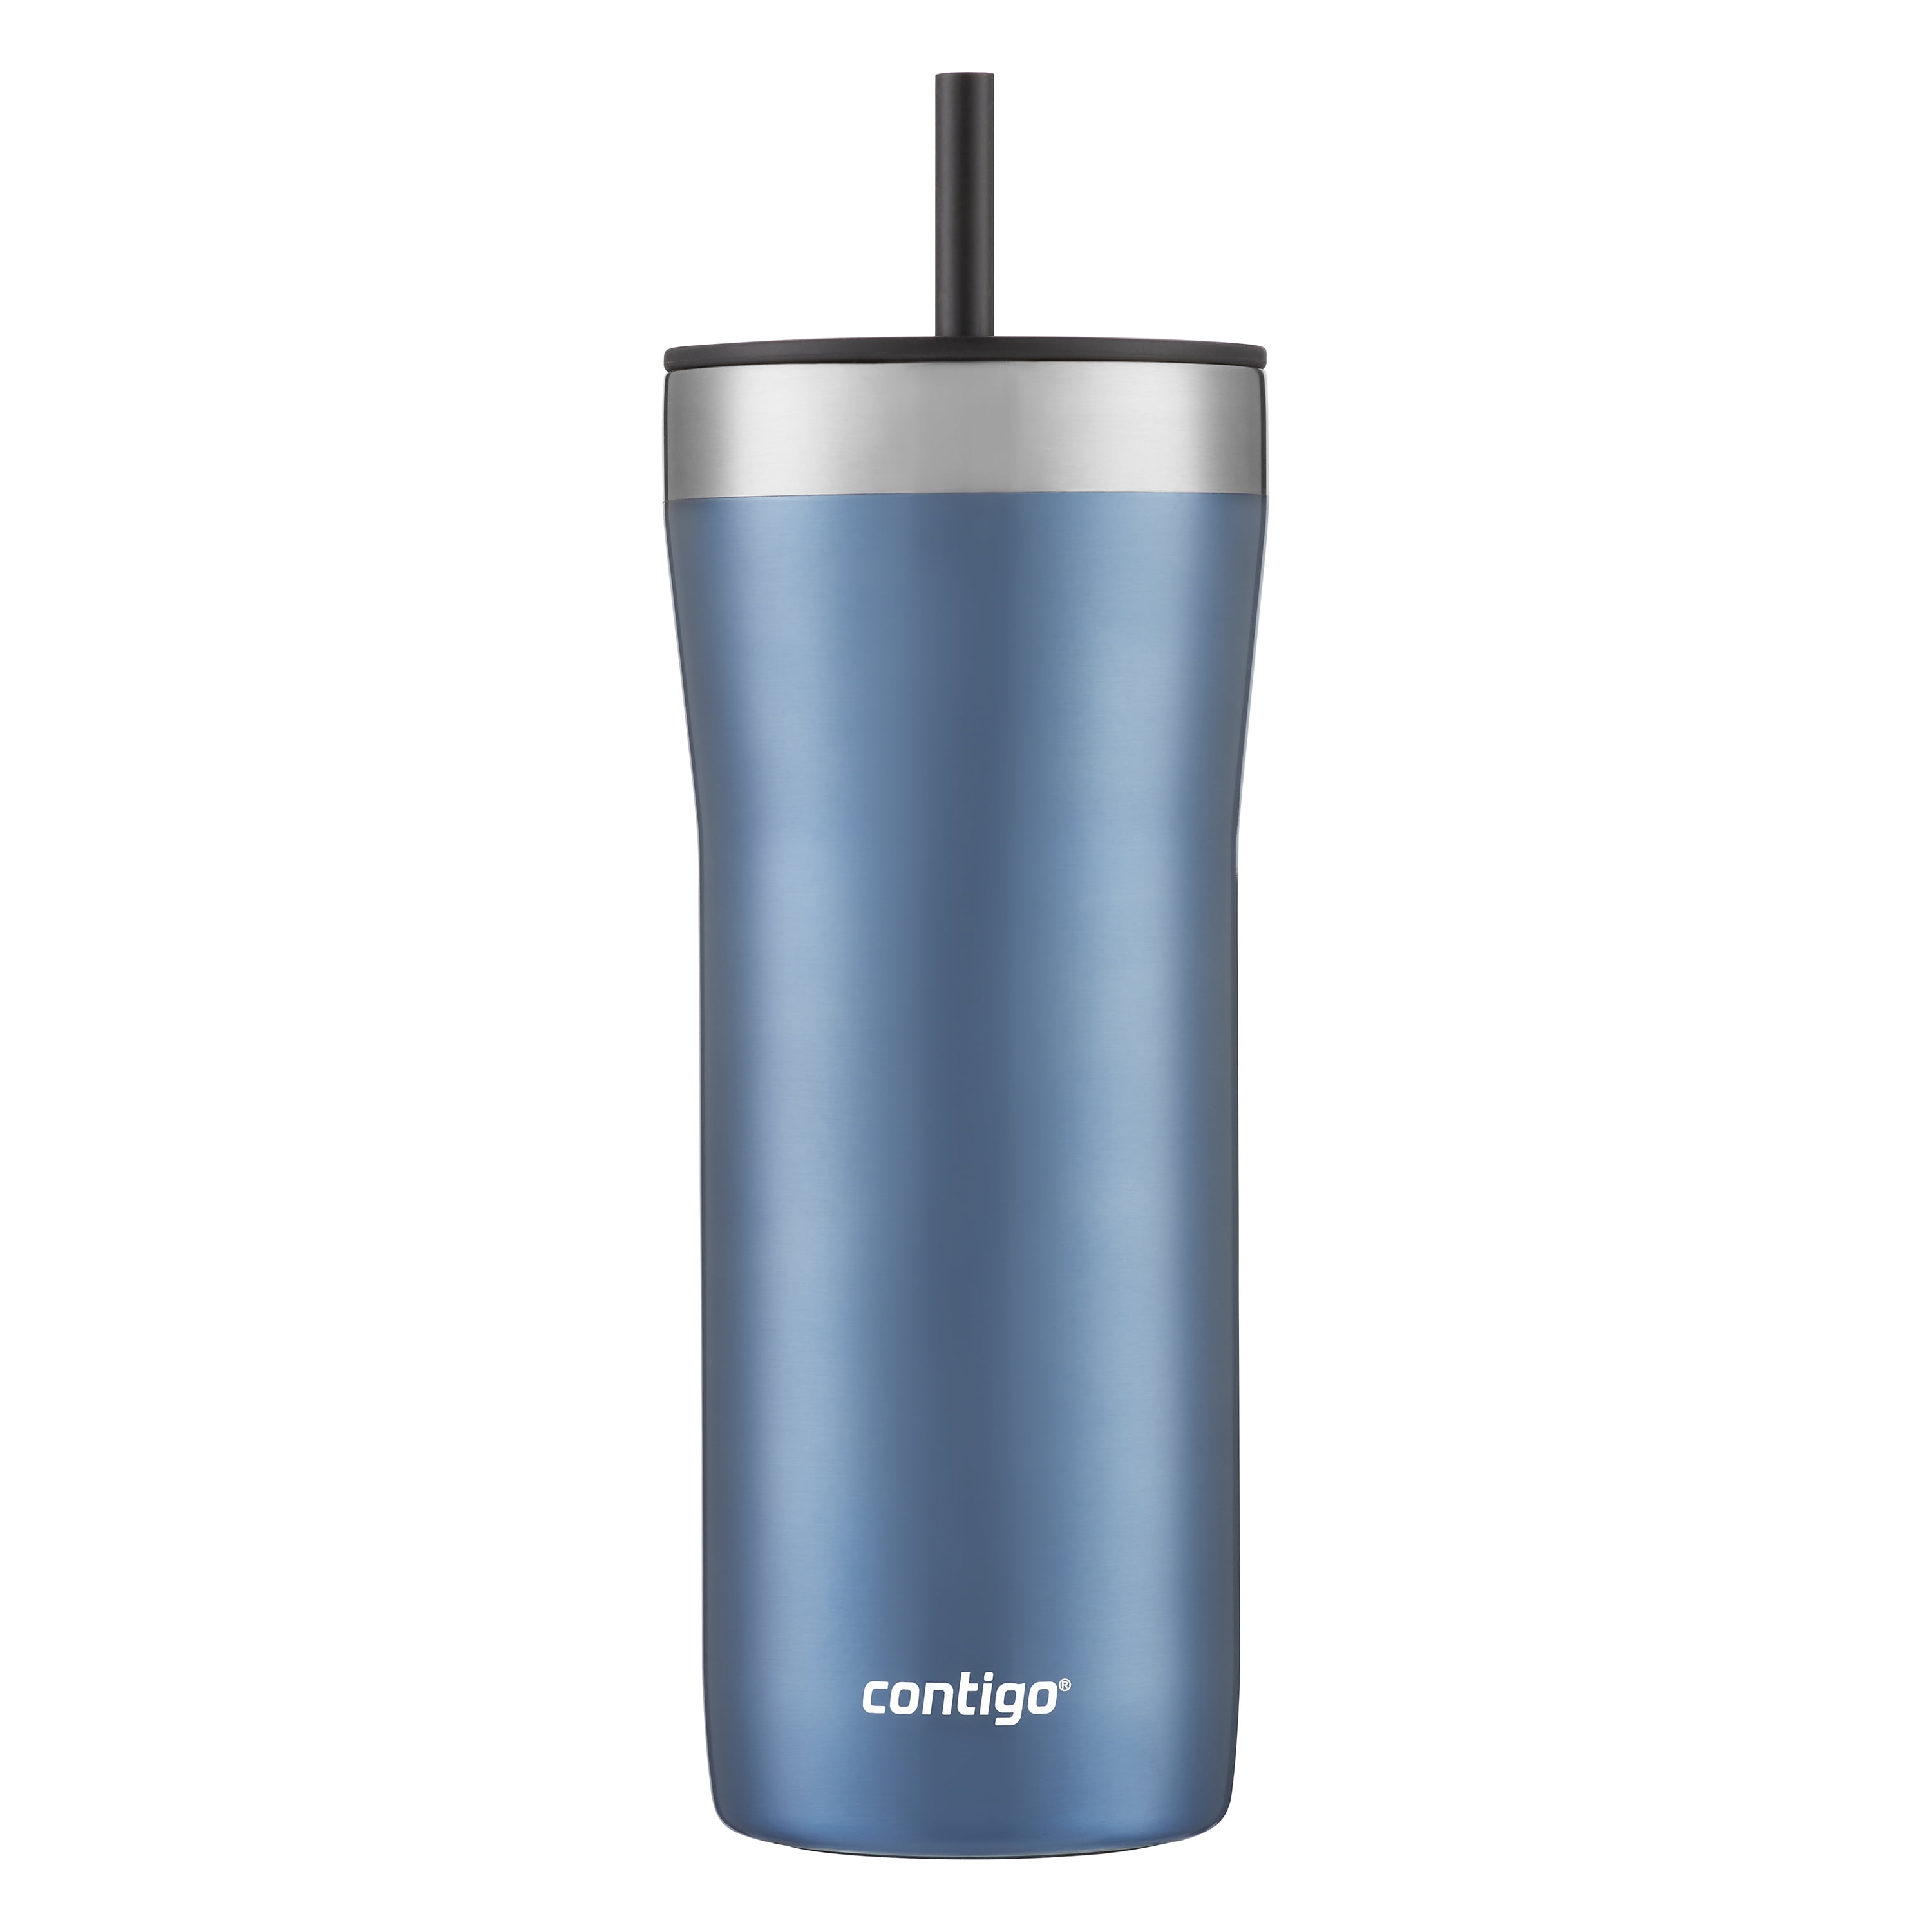 Contigo Streeterville Stainless Steel Mug with Splash-Proof Lid and Handle  in Blue, 14 fl oz.